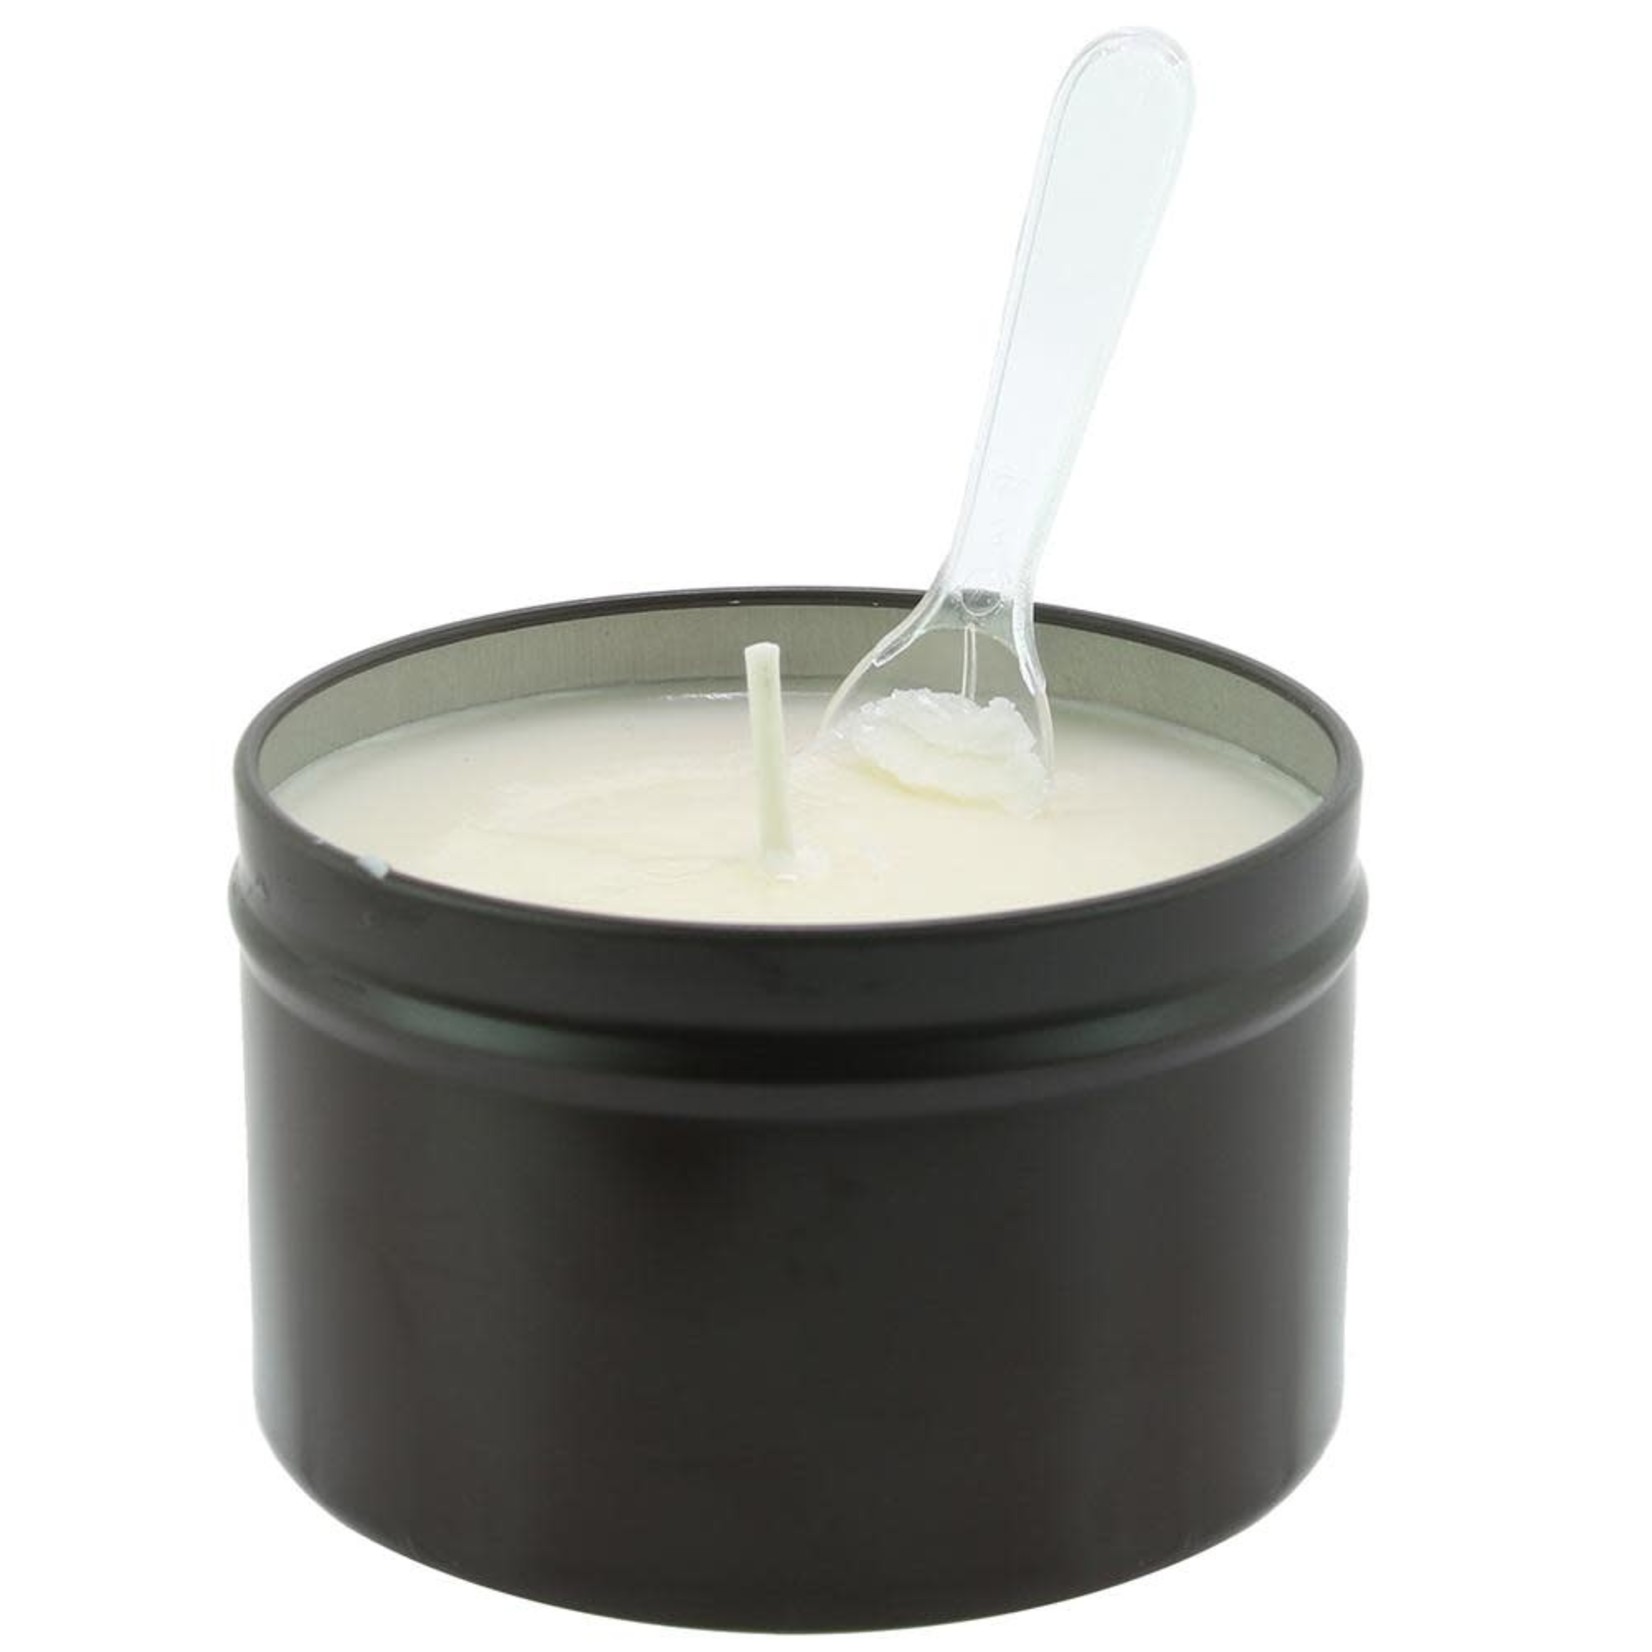 EARTHLY BODY EARTHLY BODY - 3-IN-1 MASSAGE CANDLE 6OZ/170G - SHIVER